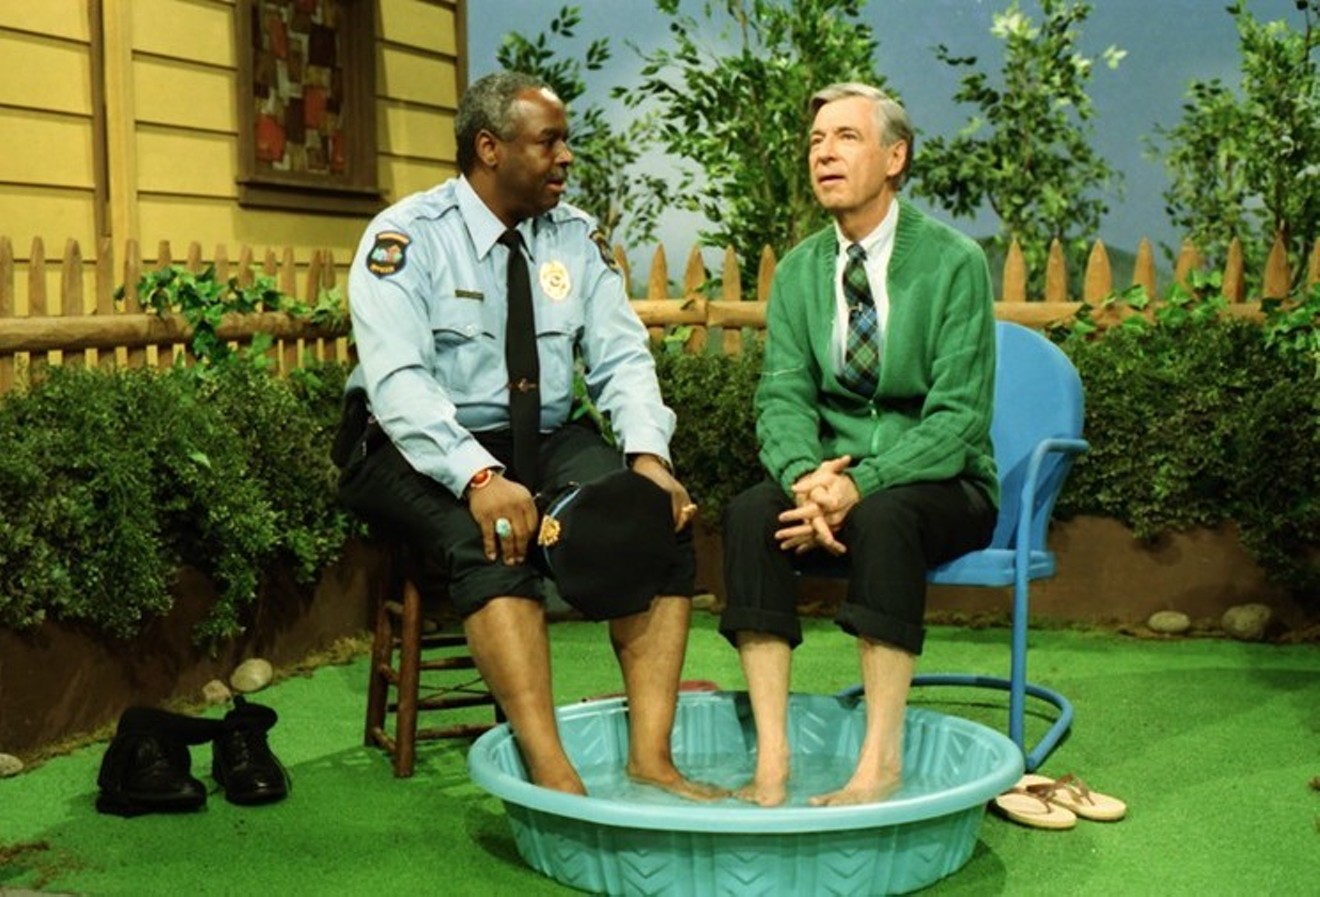 Won’t You Be My Neighbor? is a documentary that paints a flattering portrait of Fred Rogers (right), who doesn't mind getting his feet wet with Officer Clemmons (Francois Clemmons) in a 1969 episode of Mr. Rogers’ Neighborhood.